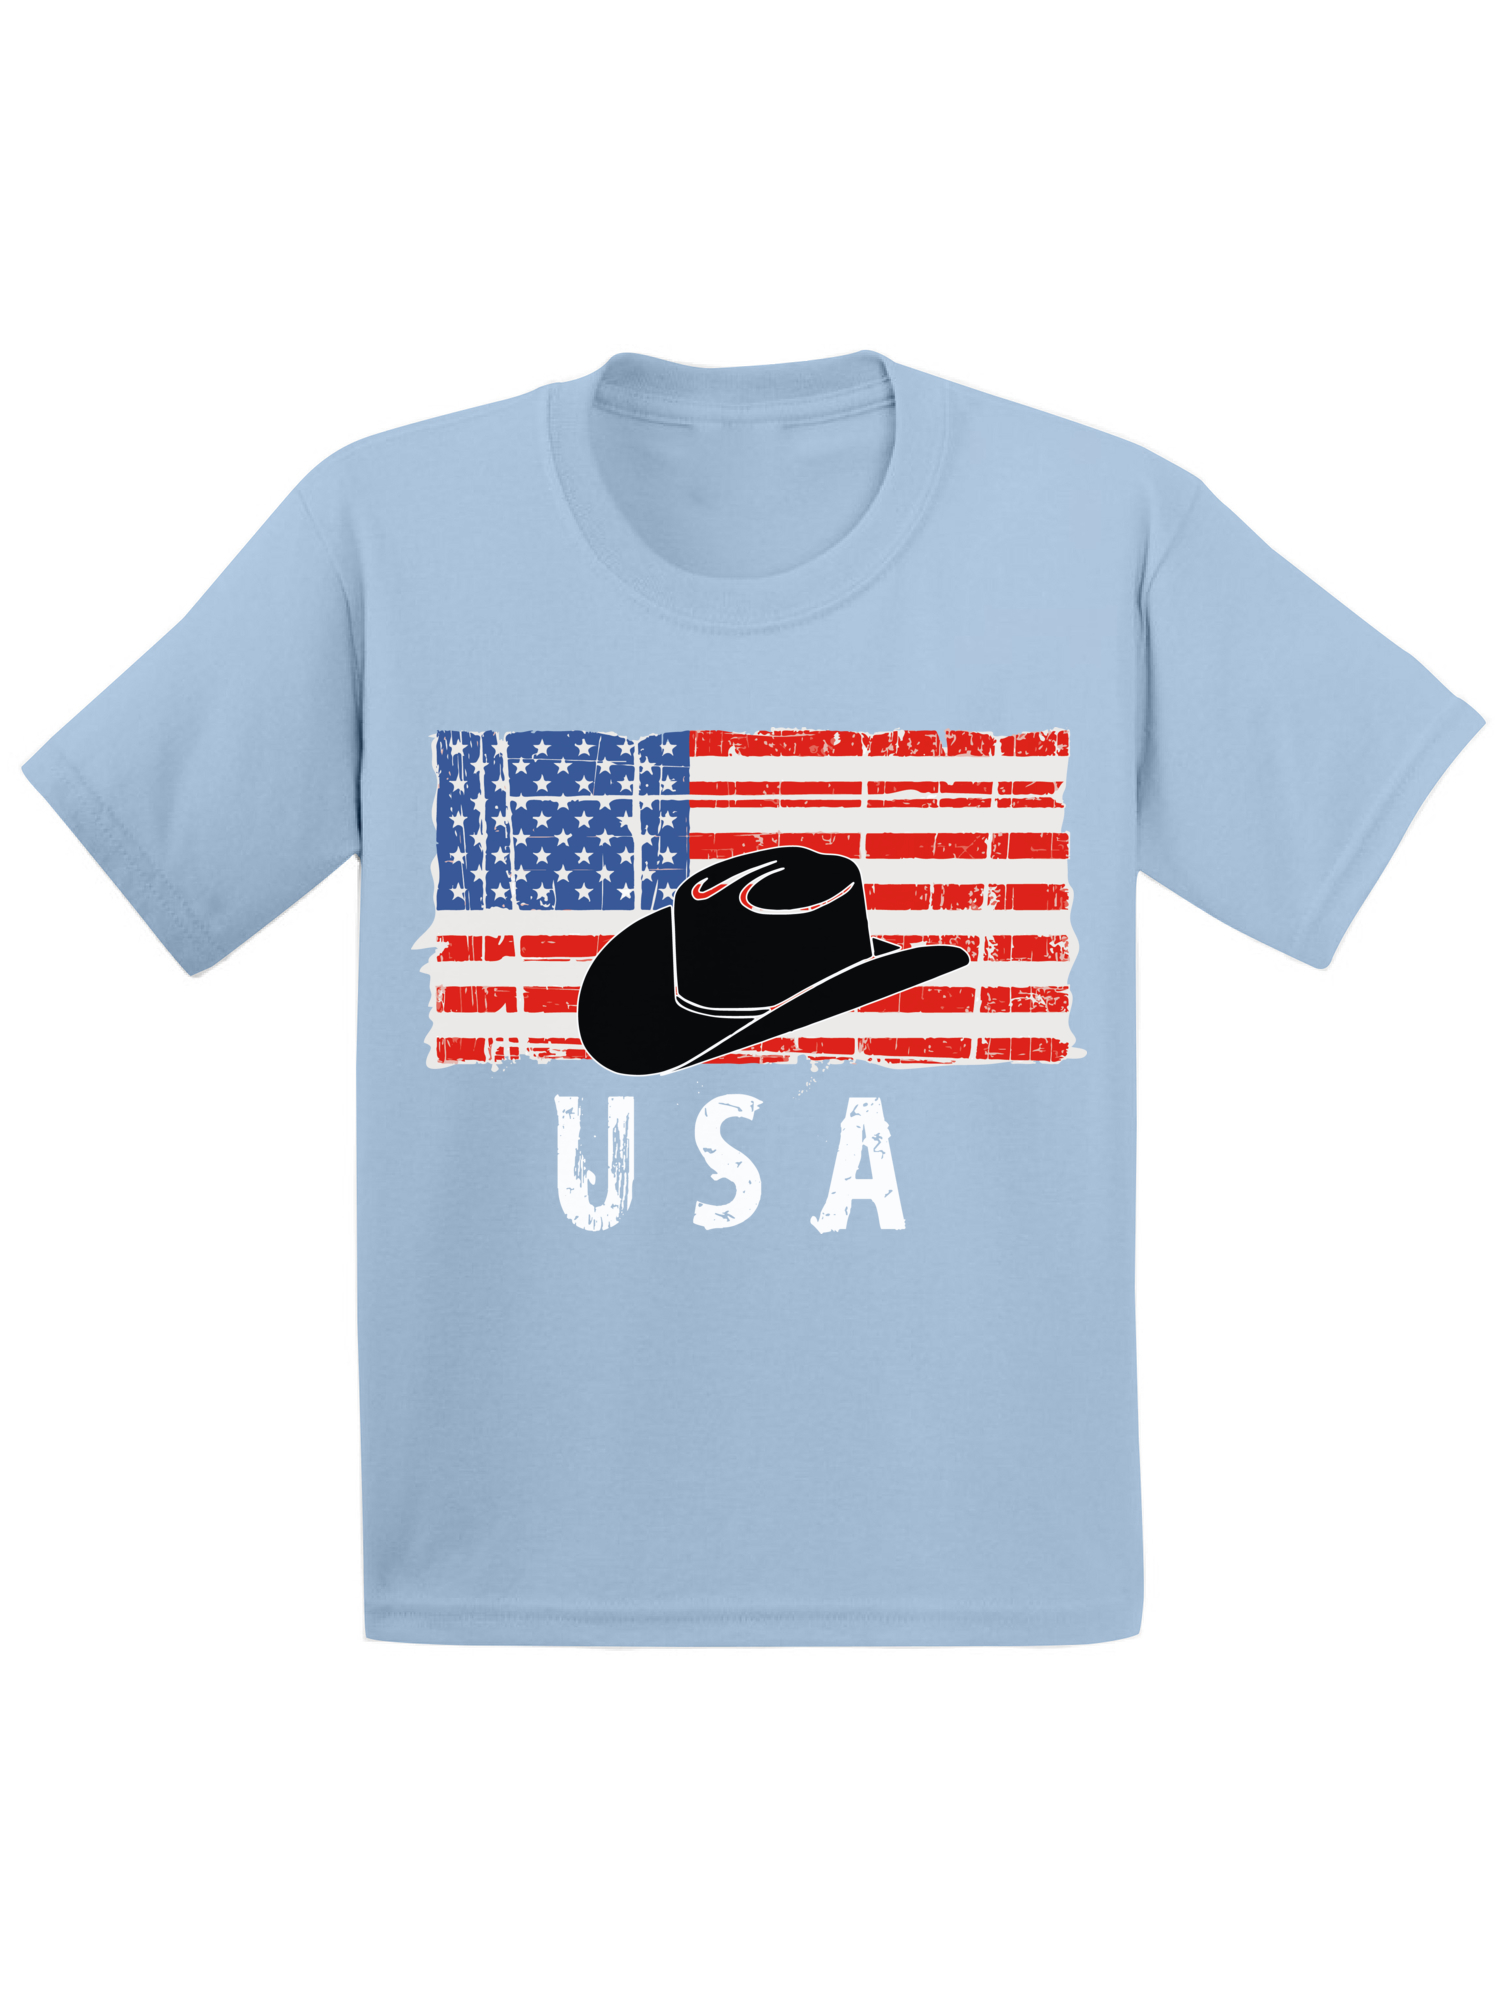 Awkward Styles Cowboy Hat USA Toddler Shirt United States Vintage USA Kids T shirt 4th of July Party Cowboy Hat Tshirt for Boys Love USA Cowboy Hat Tshirt for Girls Red White and Blue - image 1 of 4